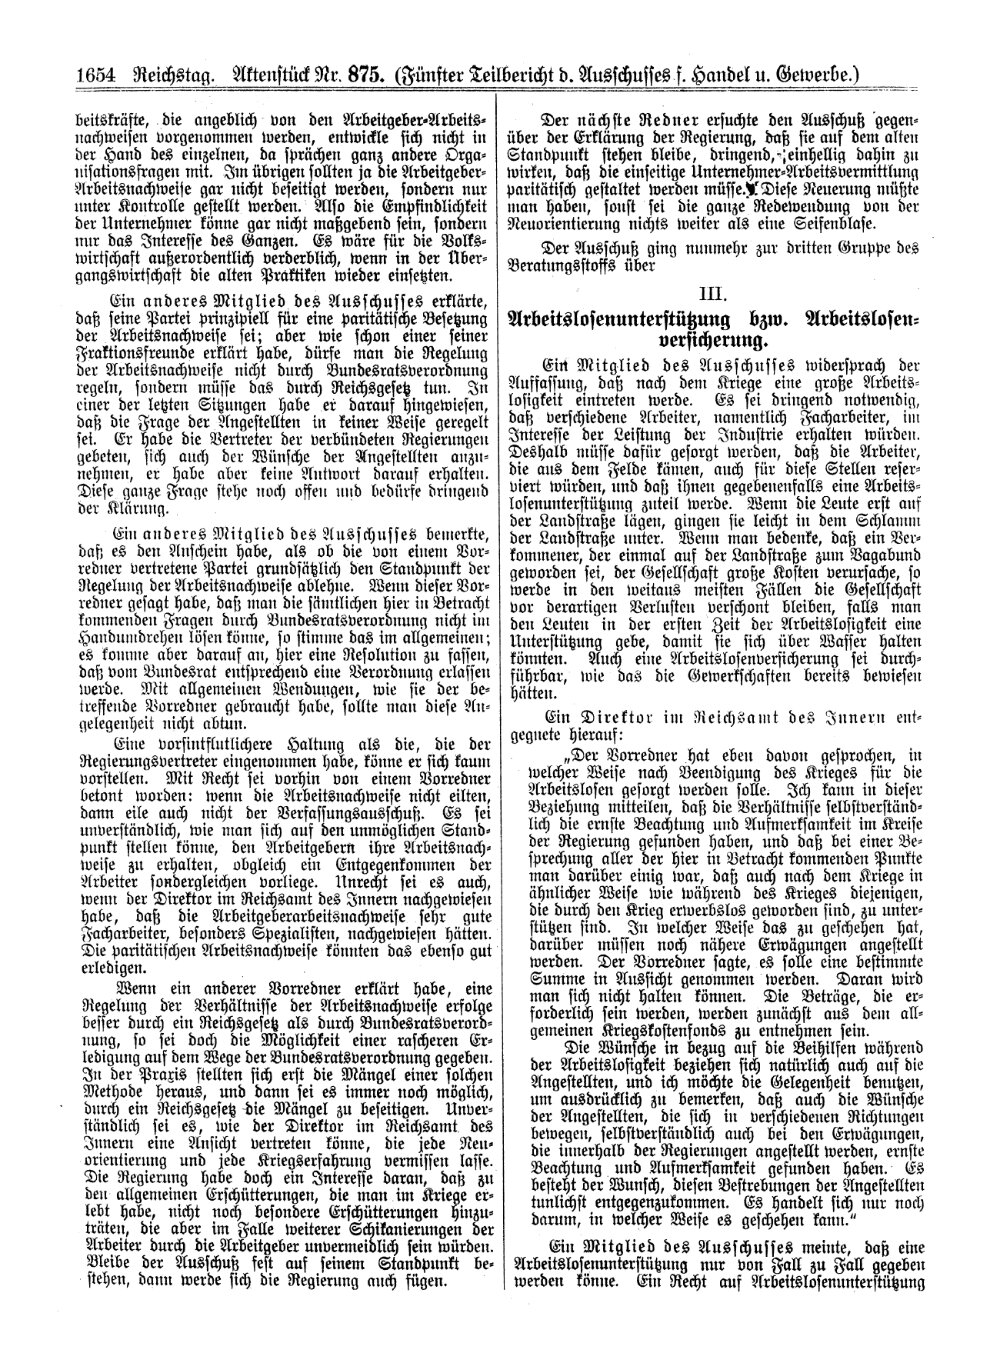 Scan of page 1654